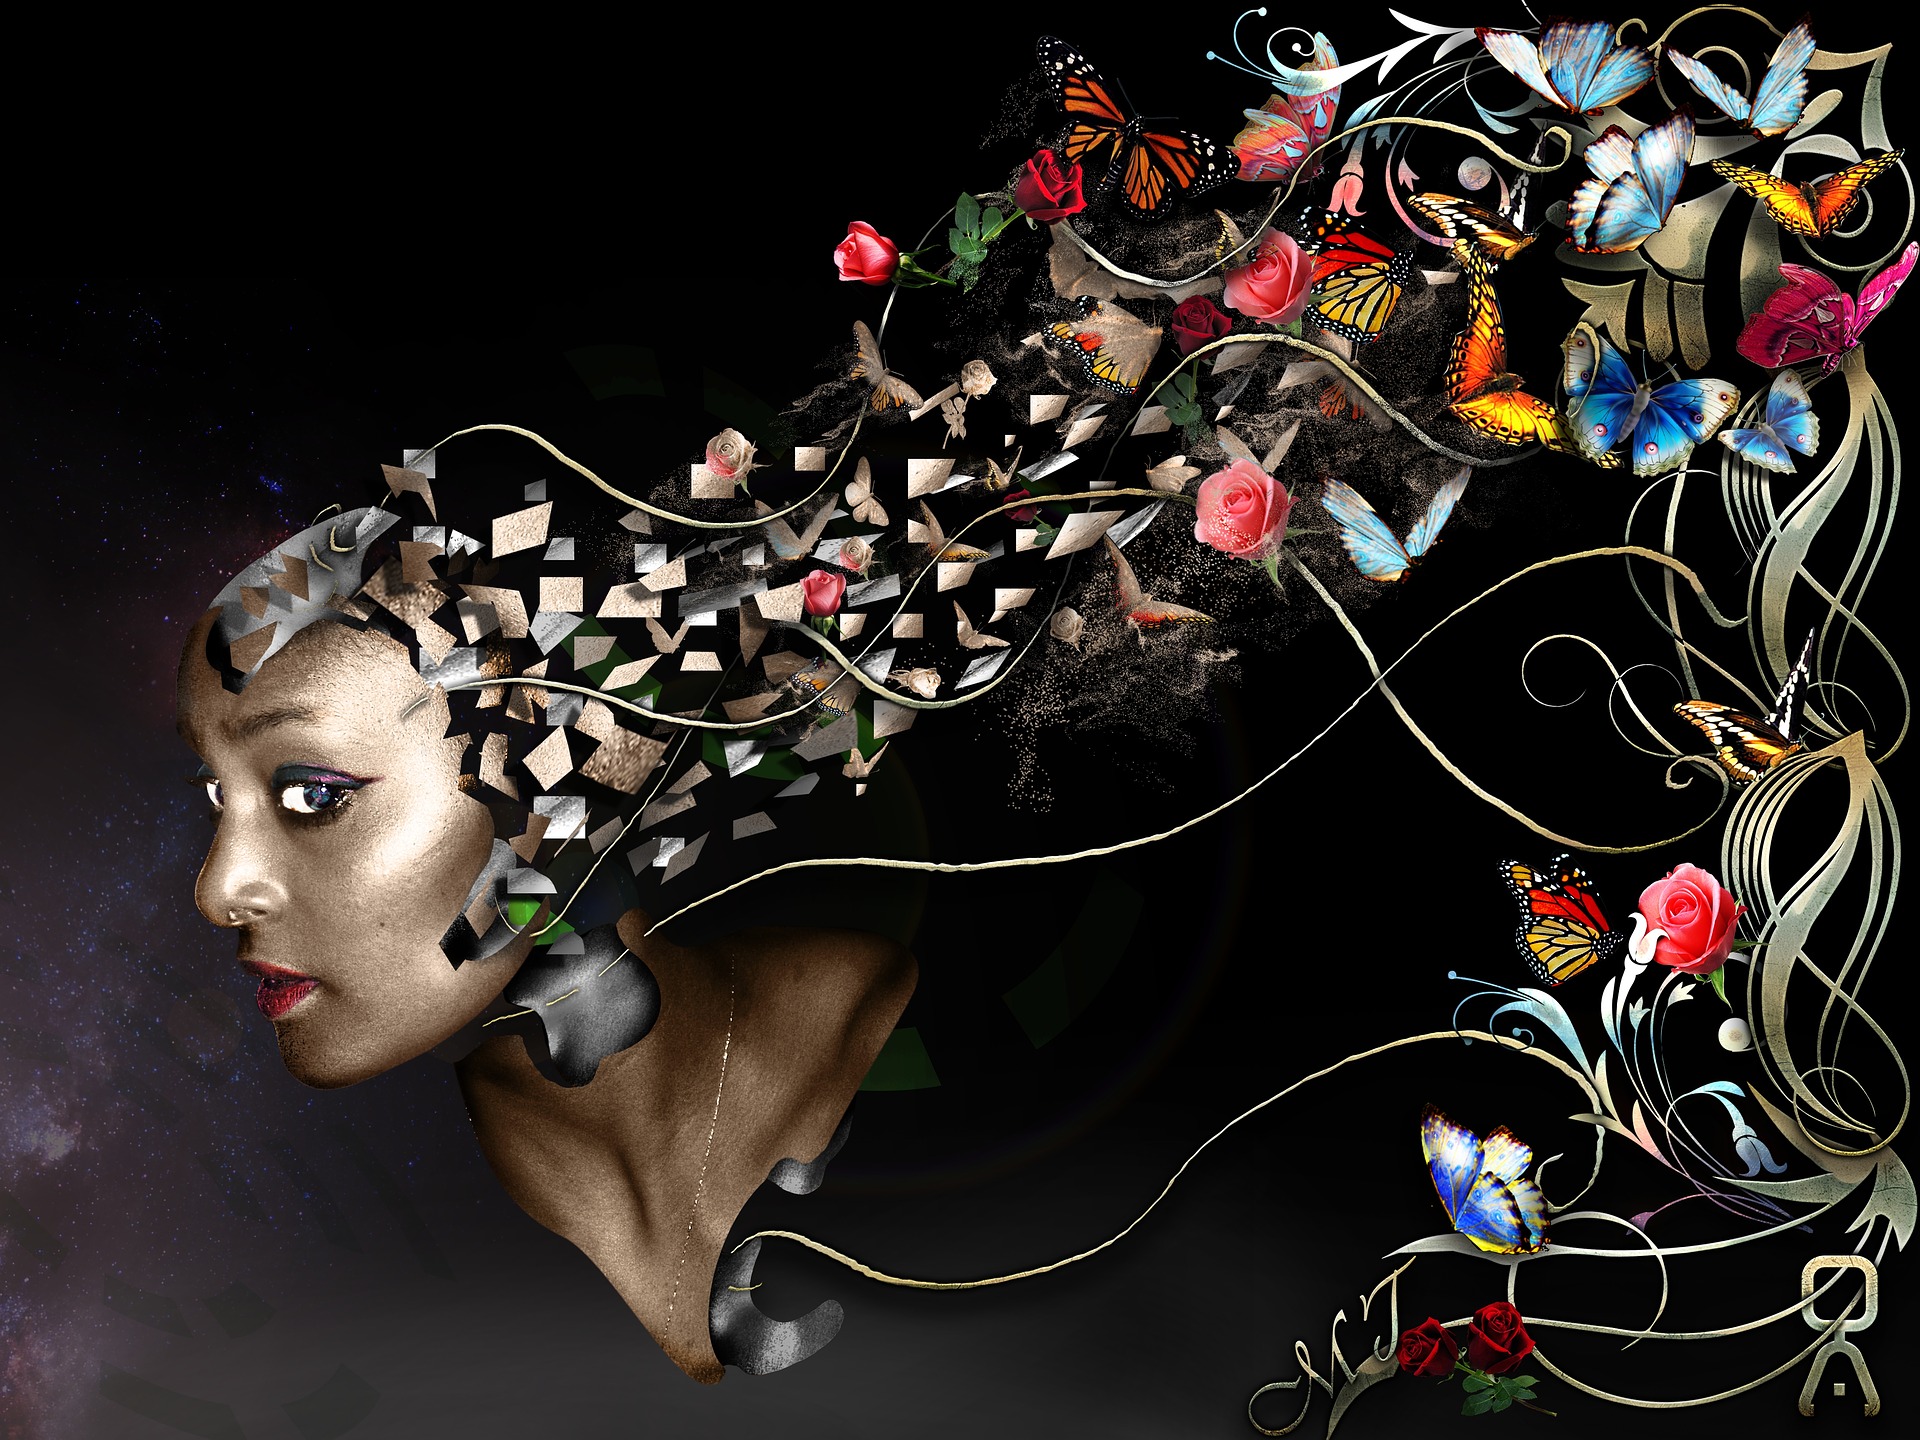 Abstract image of butterflies and flowers coming out of the back of a black woman's head